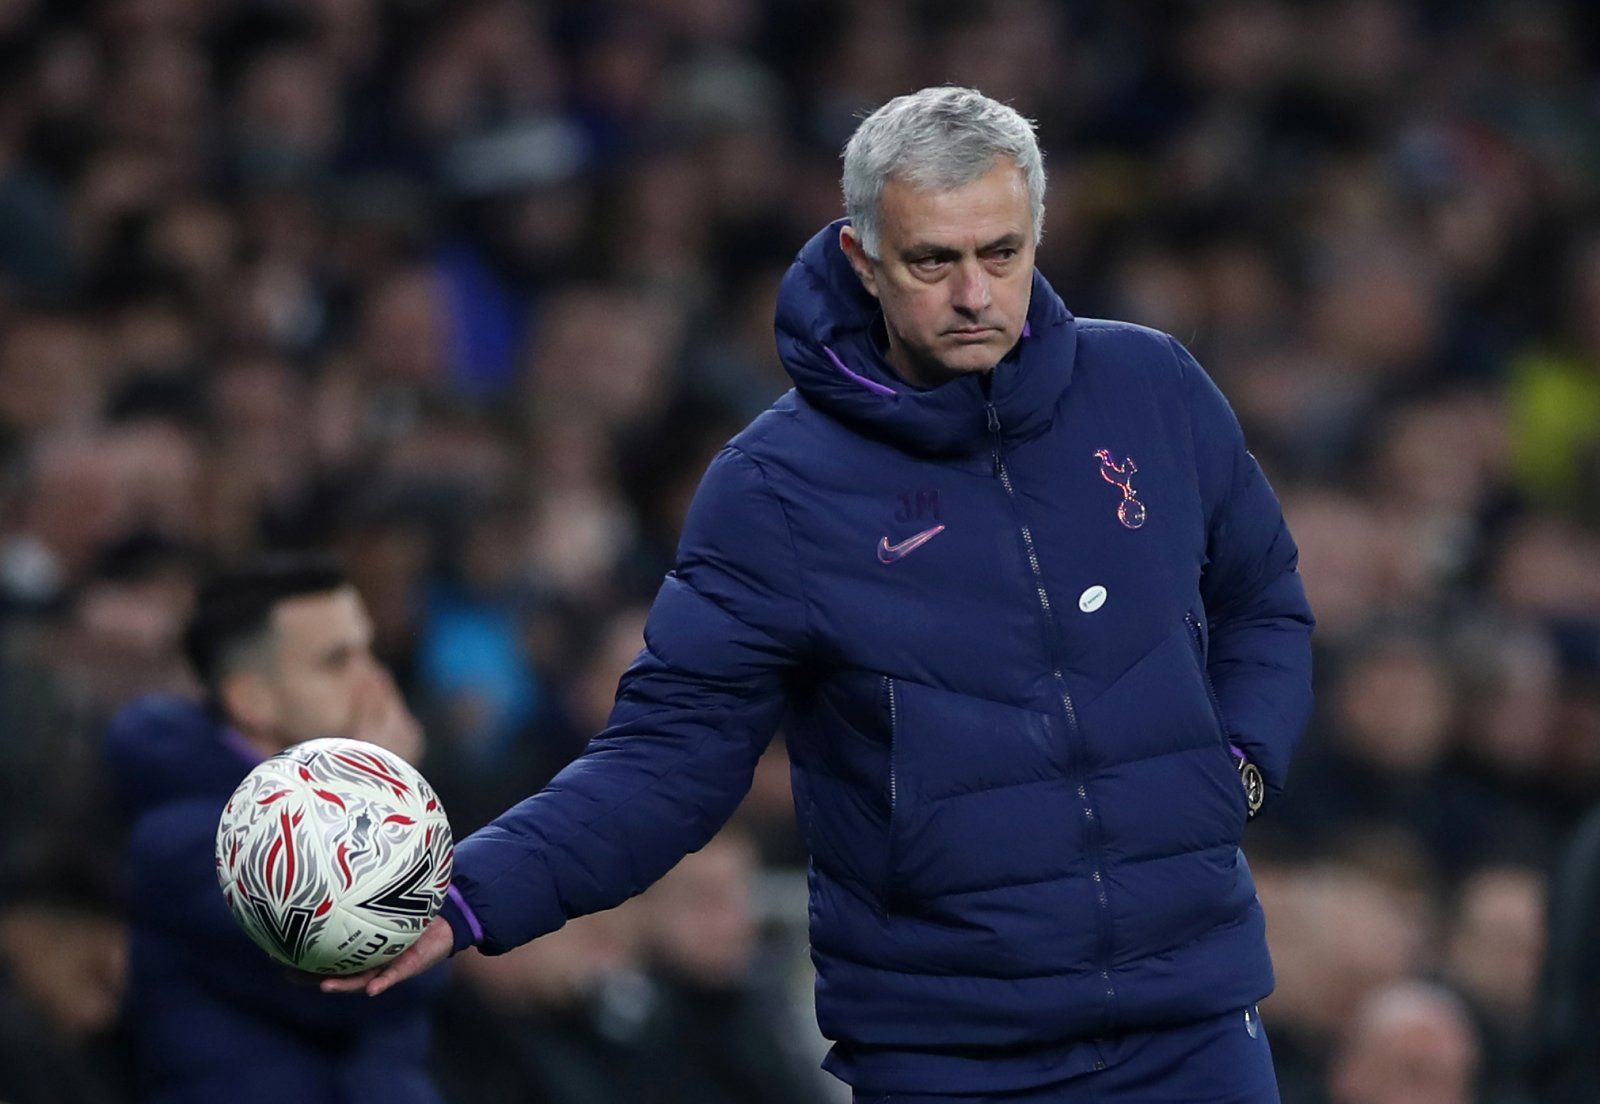 It became known how much "Tottenham" will cost dismissal of Jose Mourinho